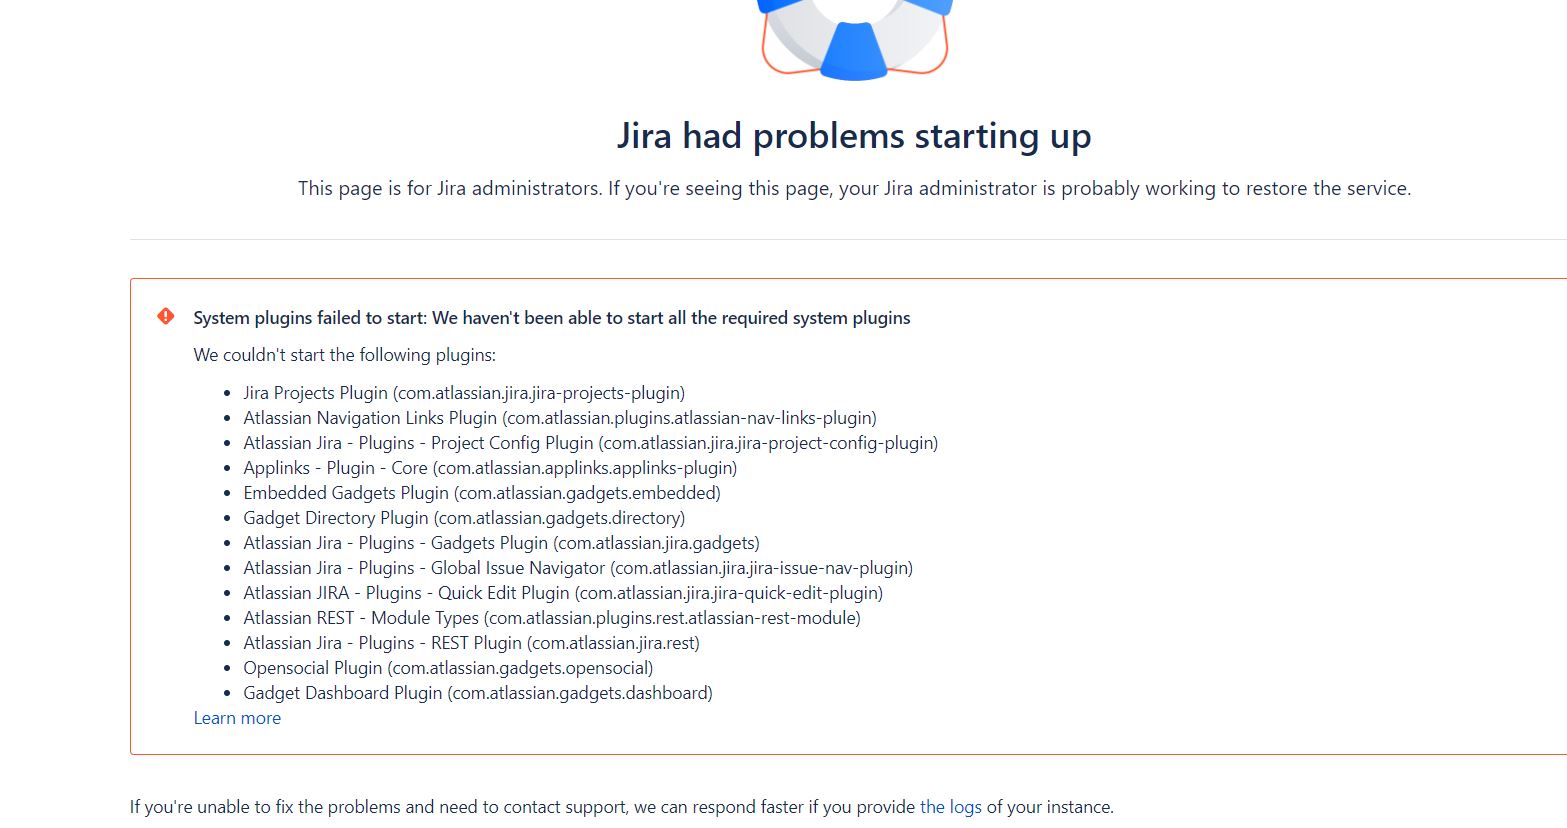 MCL-21255] Error 0x80131500 when trying to install the launcher - Jira